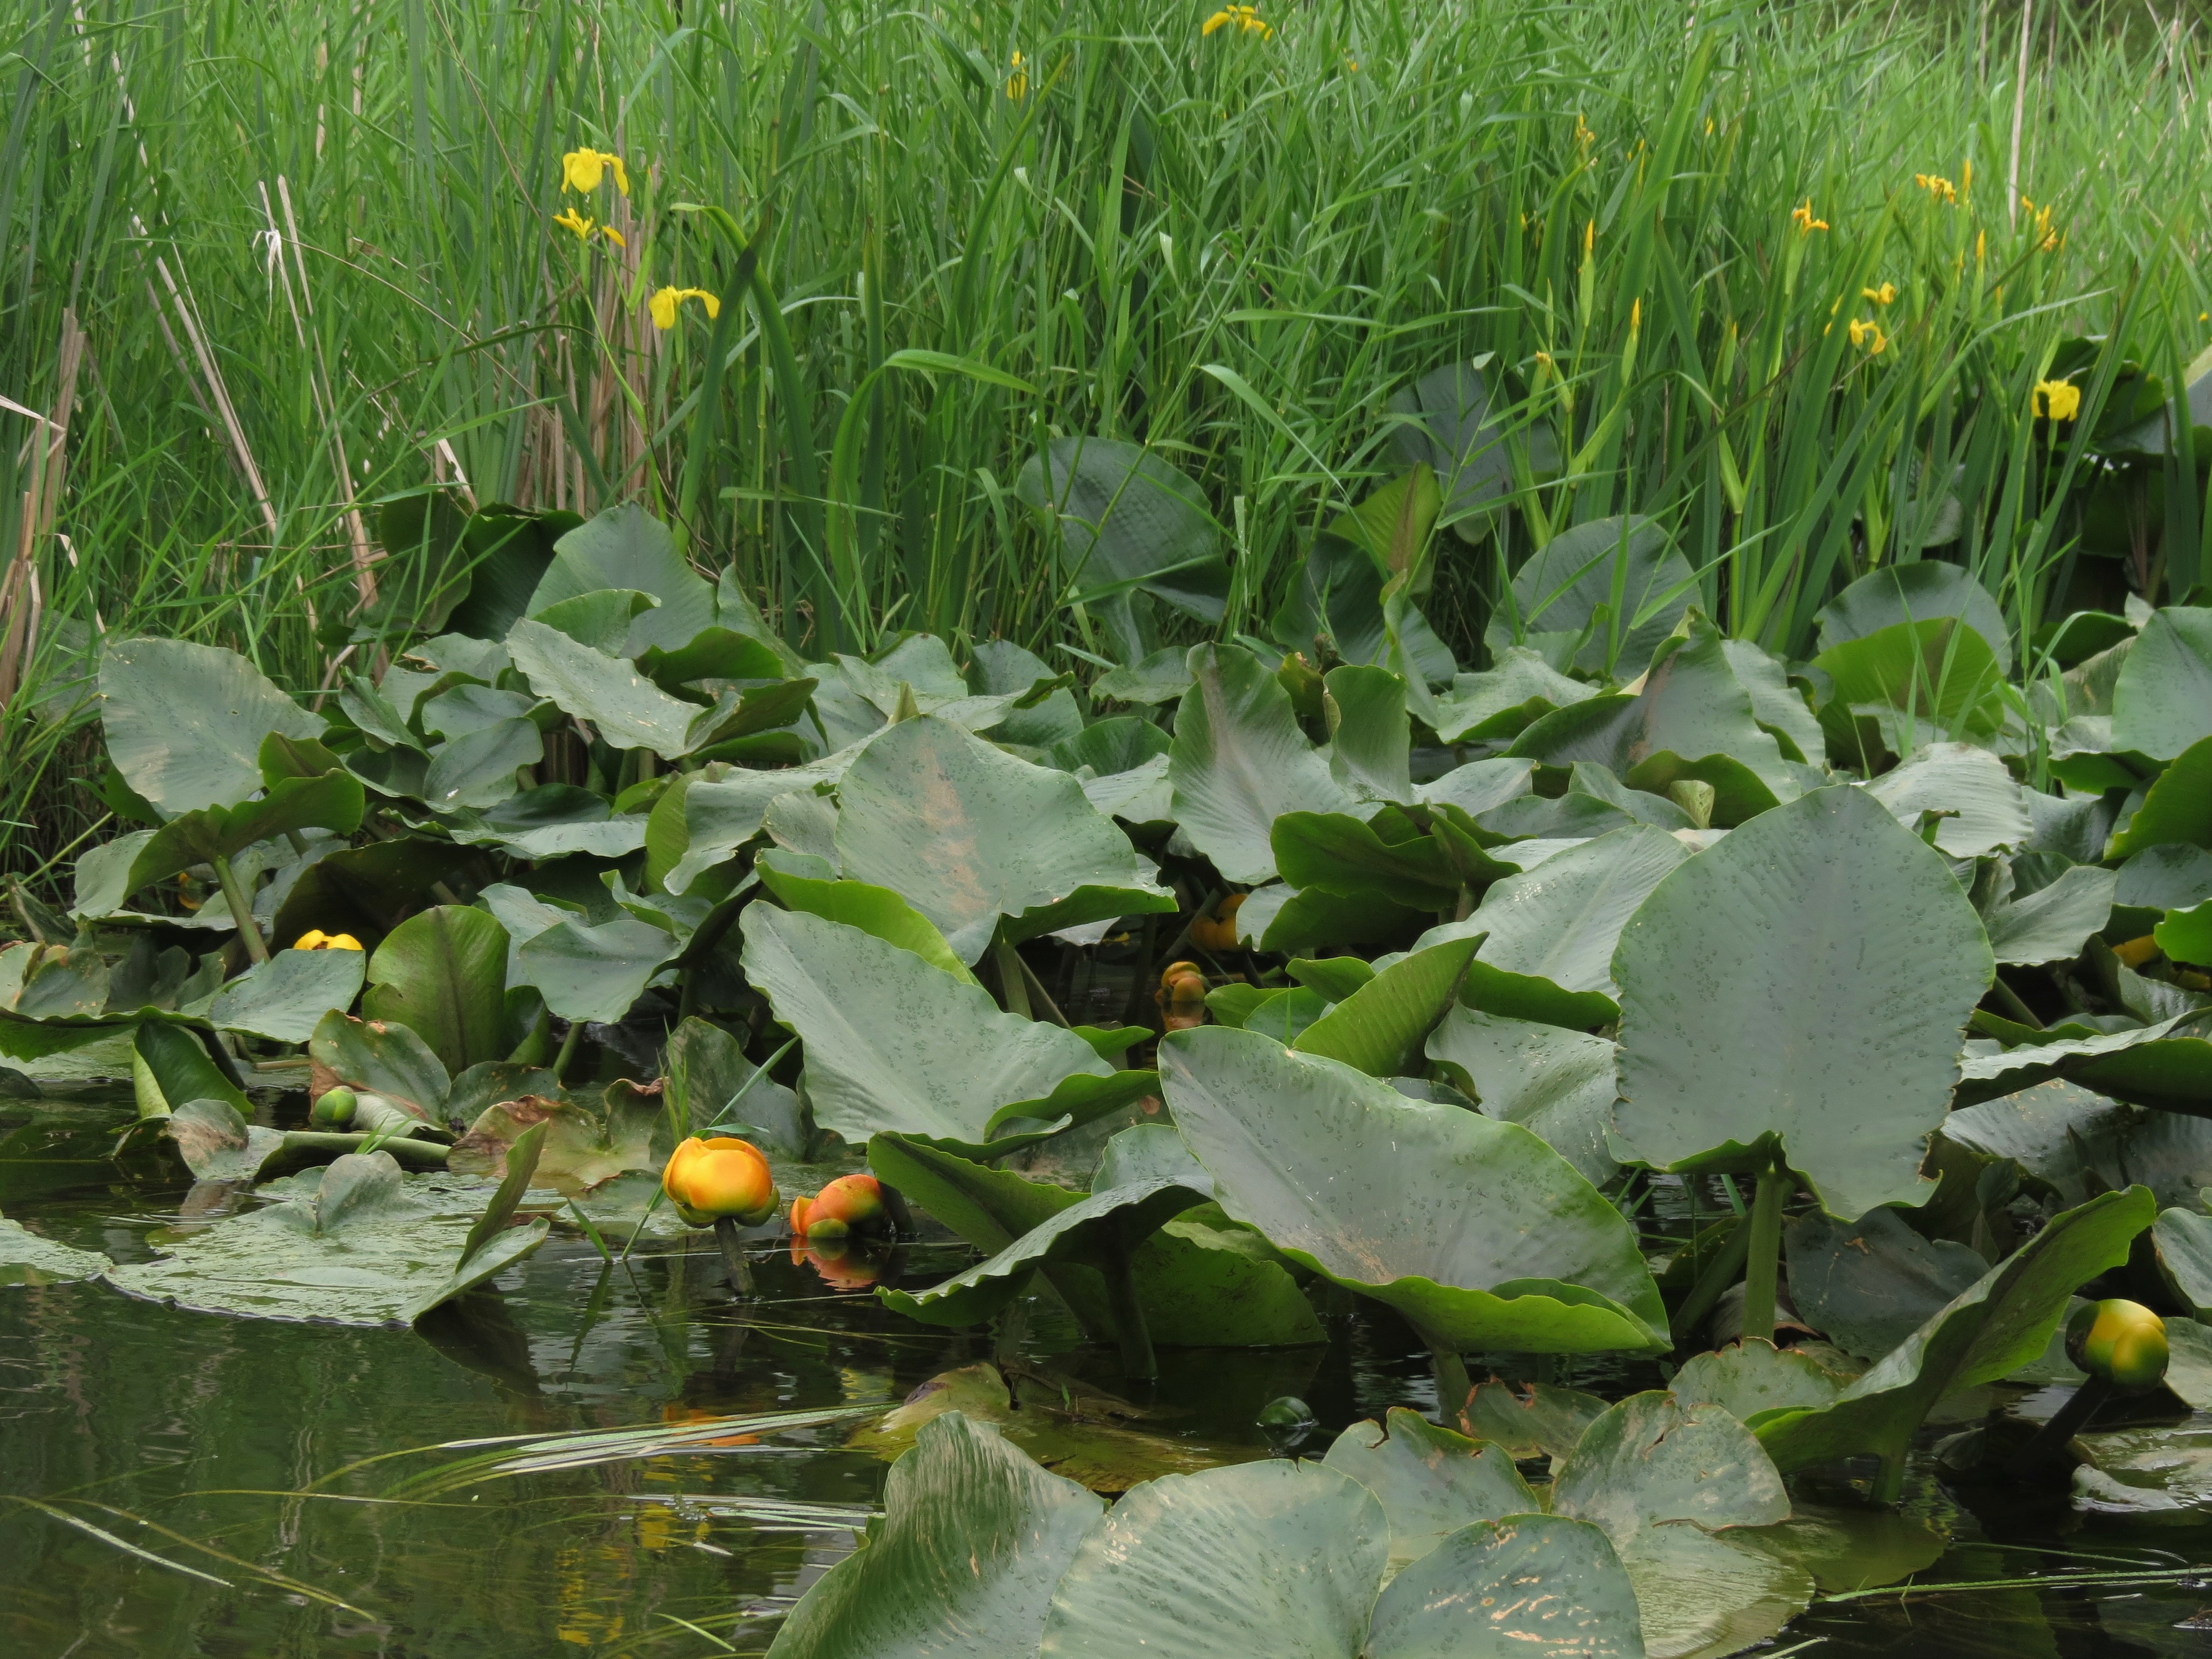 Waterlilies blooming in the spring at Big Lake Wetlands Conservation Area. Photograph credit: Skagit Land Trust staff.